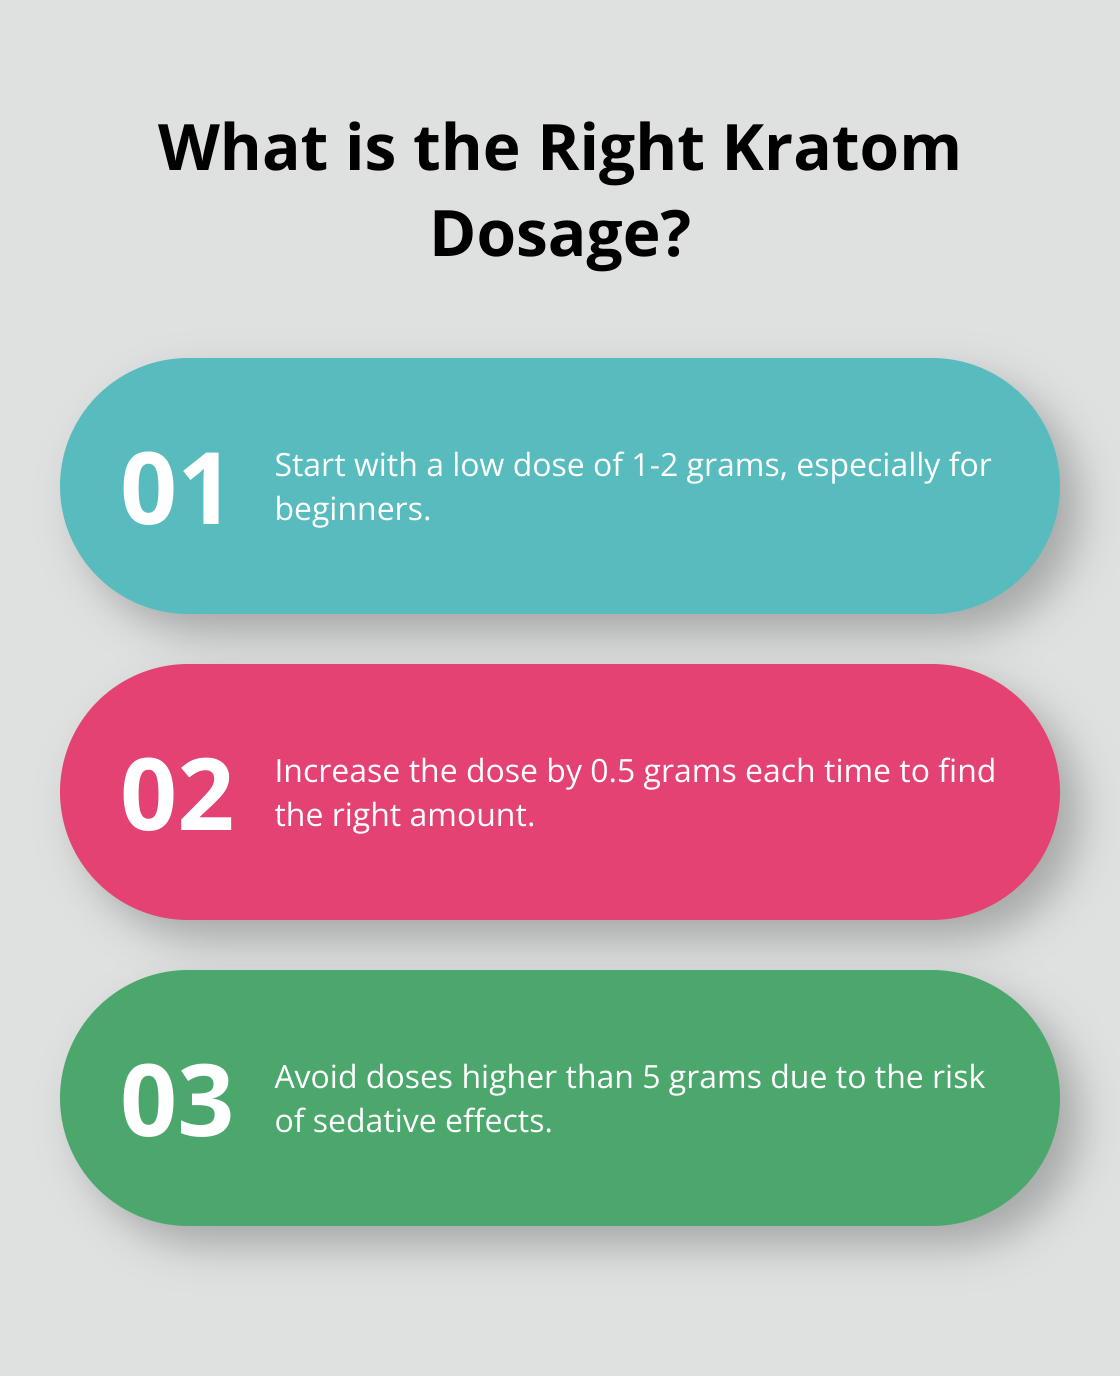 Fact - What is the Right Kratom Dosage?